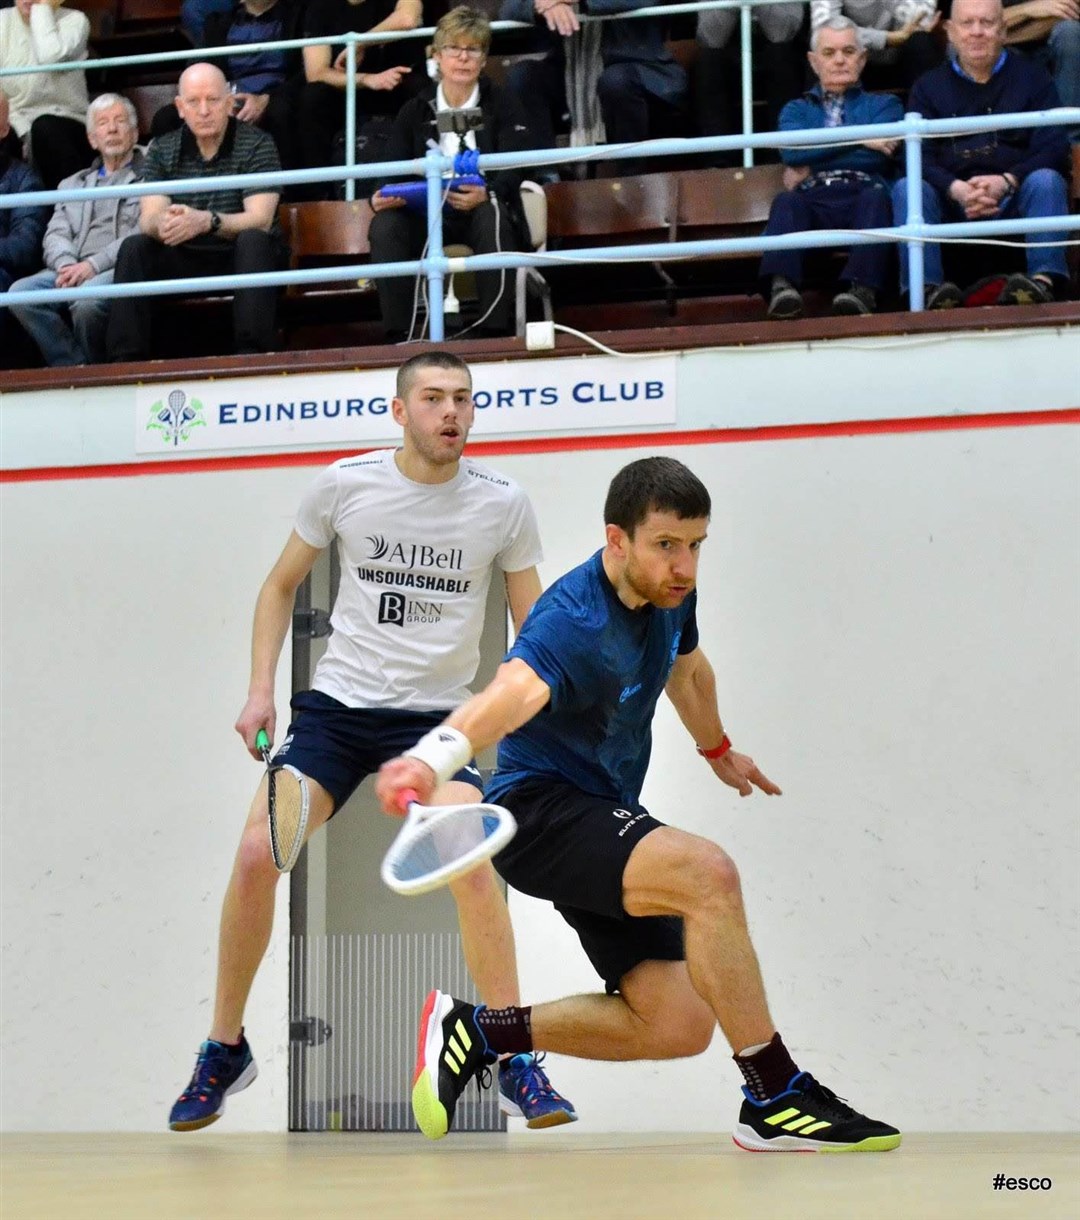 Alan Clyne competing in February 2020 at the Edinburgh Sport Club Open against fellow Scot Rory Stewart.